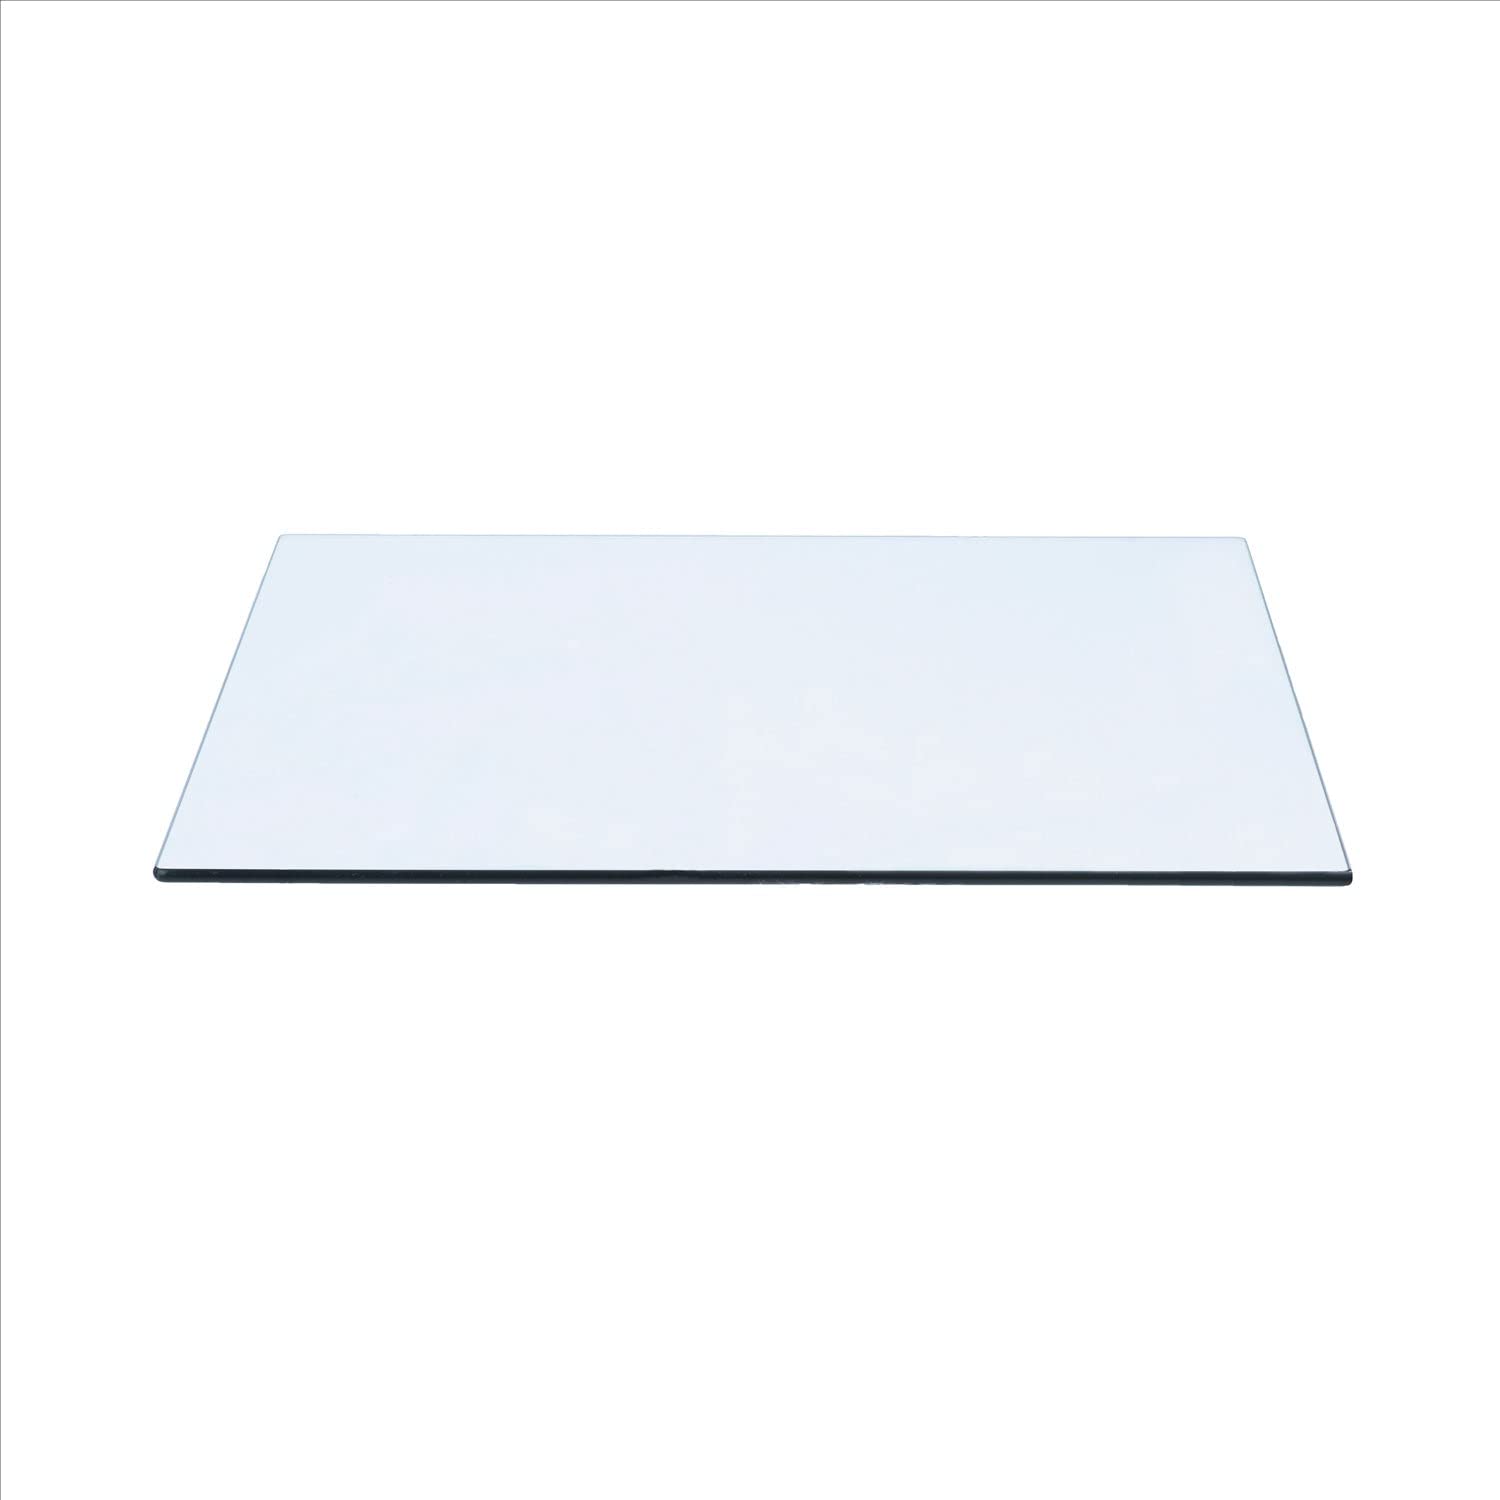 Spancraft 15" x 48" Rectangle Clear Tempered Glass Table Top 3/8" Thick - Flat Polish Edge